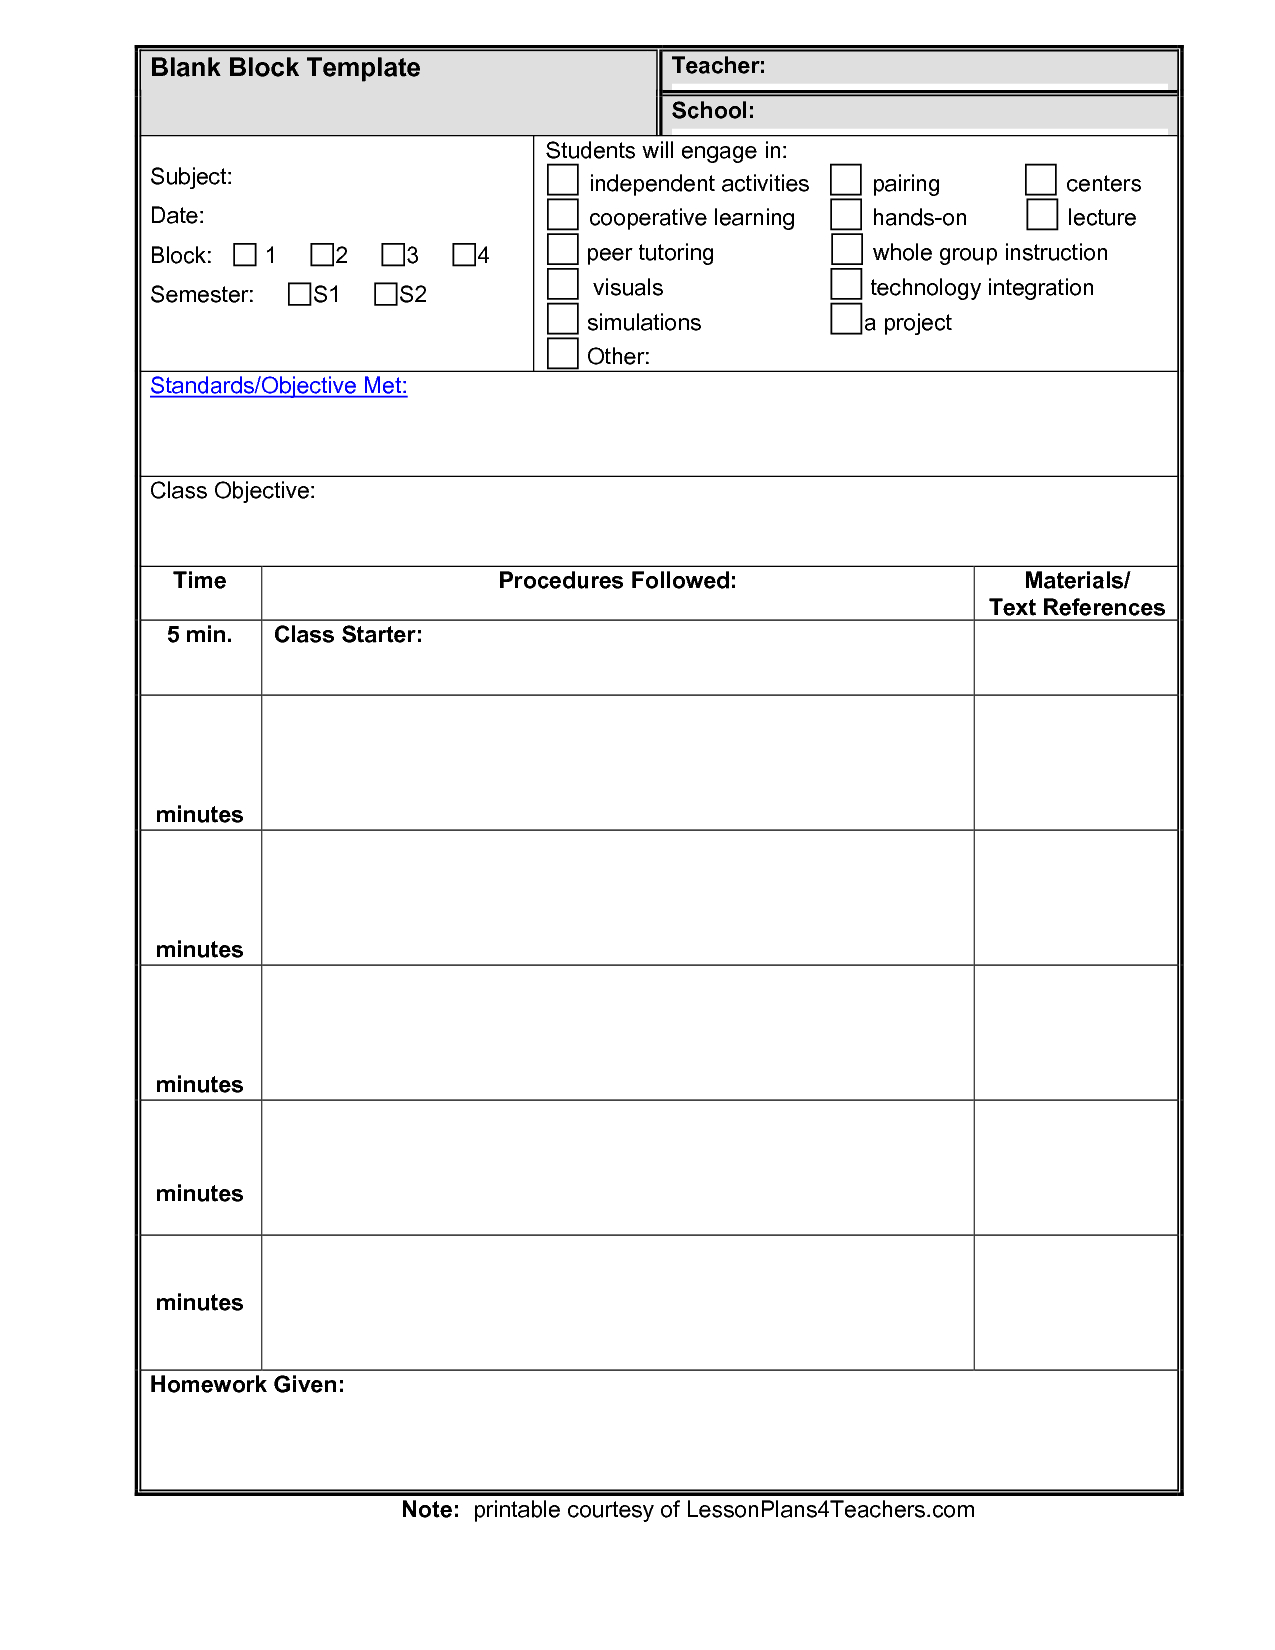 Free Blank Lesson Plan Templates Best Business Template Qw9Zdlcx - Free Printable Lesson Plan Template Blank